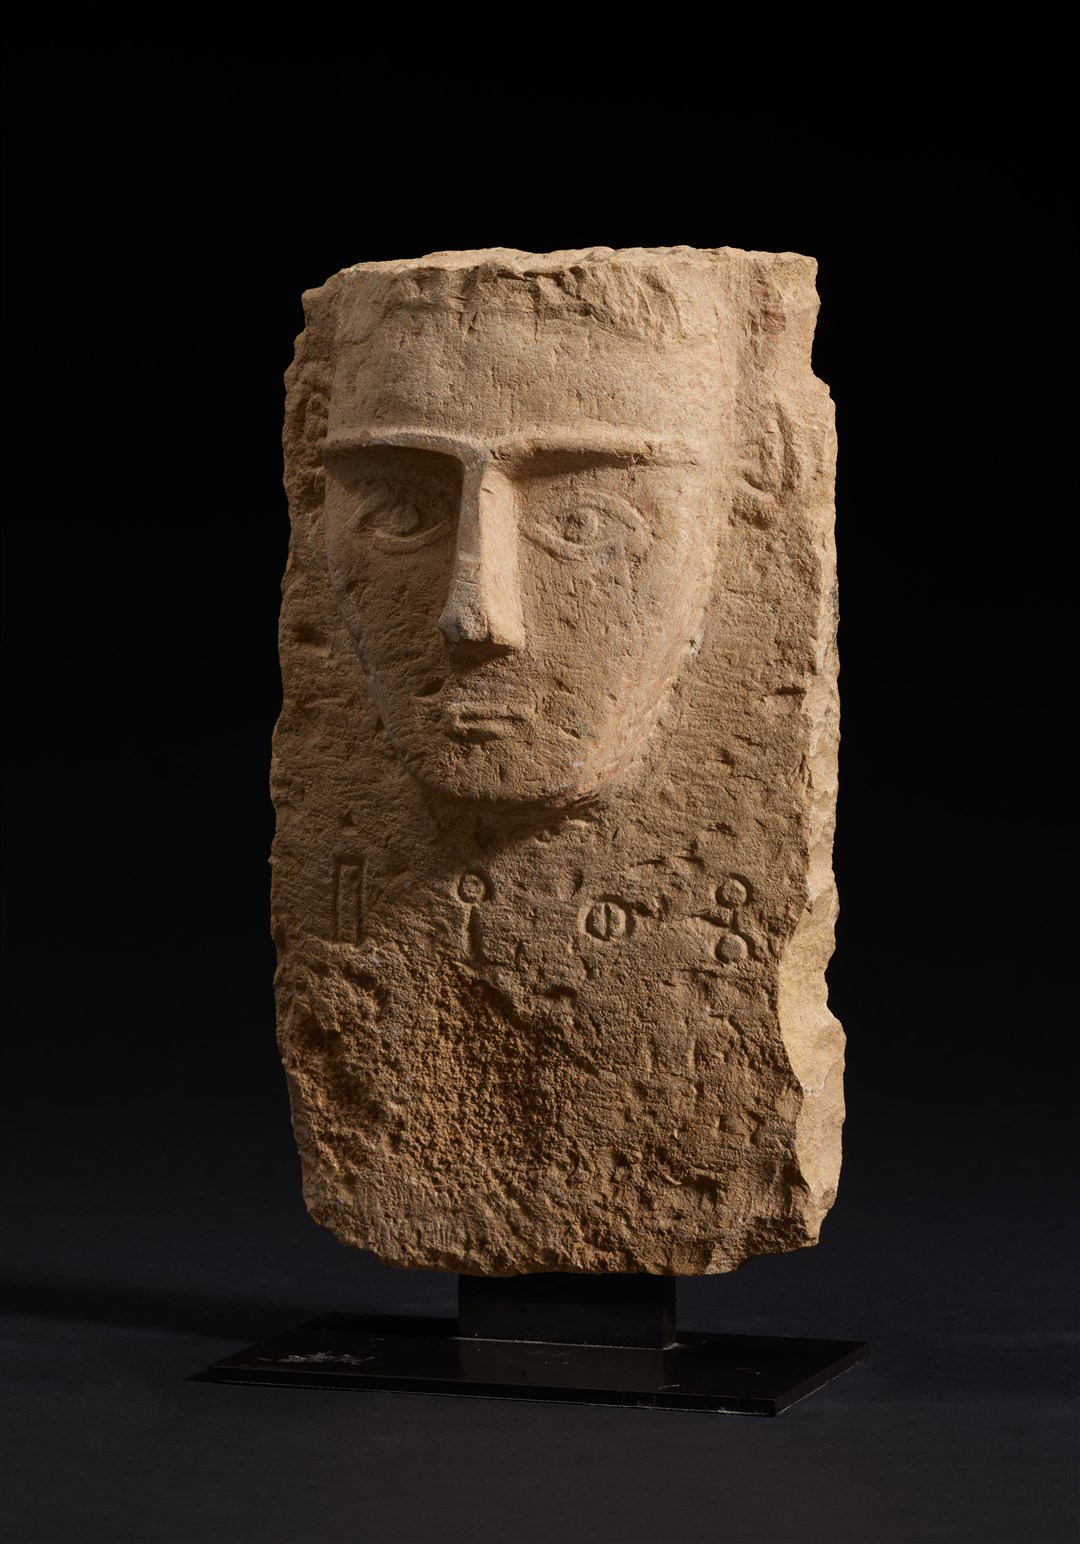 The V&A announces a historic agreement with the Republic of Yemen to research and temporarily care for four ancient carved stone funerary stelae, which were likely illegally looted from the Republic of Yemen, ahead of their safe return to their country of origin. The objects, likely dating from the second half of the first millennium BCE, will go on display at V&A East Storehouse from 2025 (Victoria and Albert Museum London)